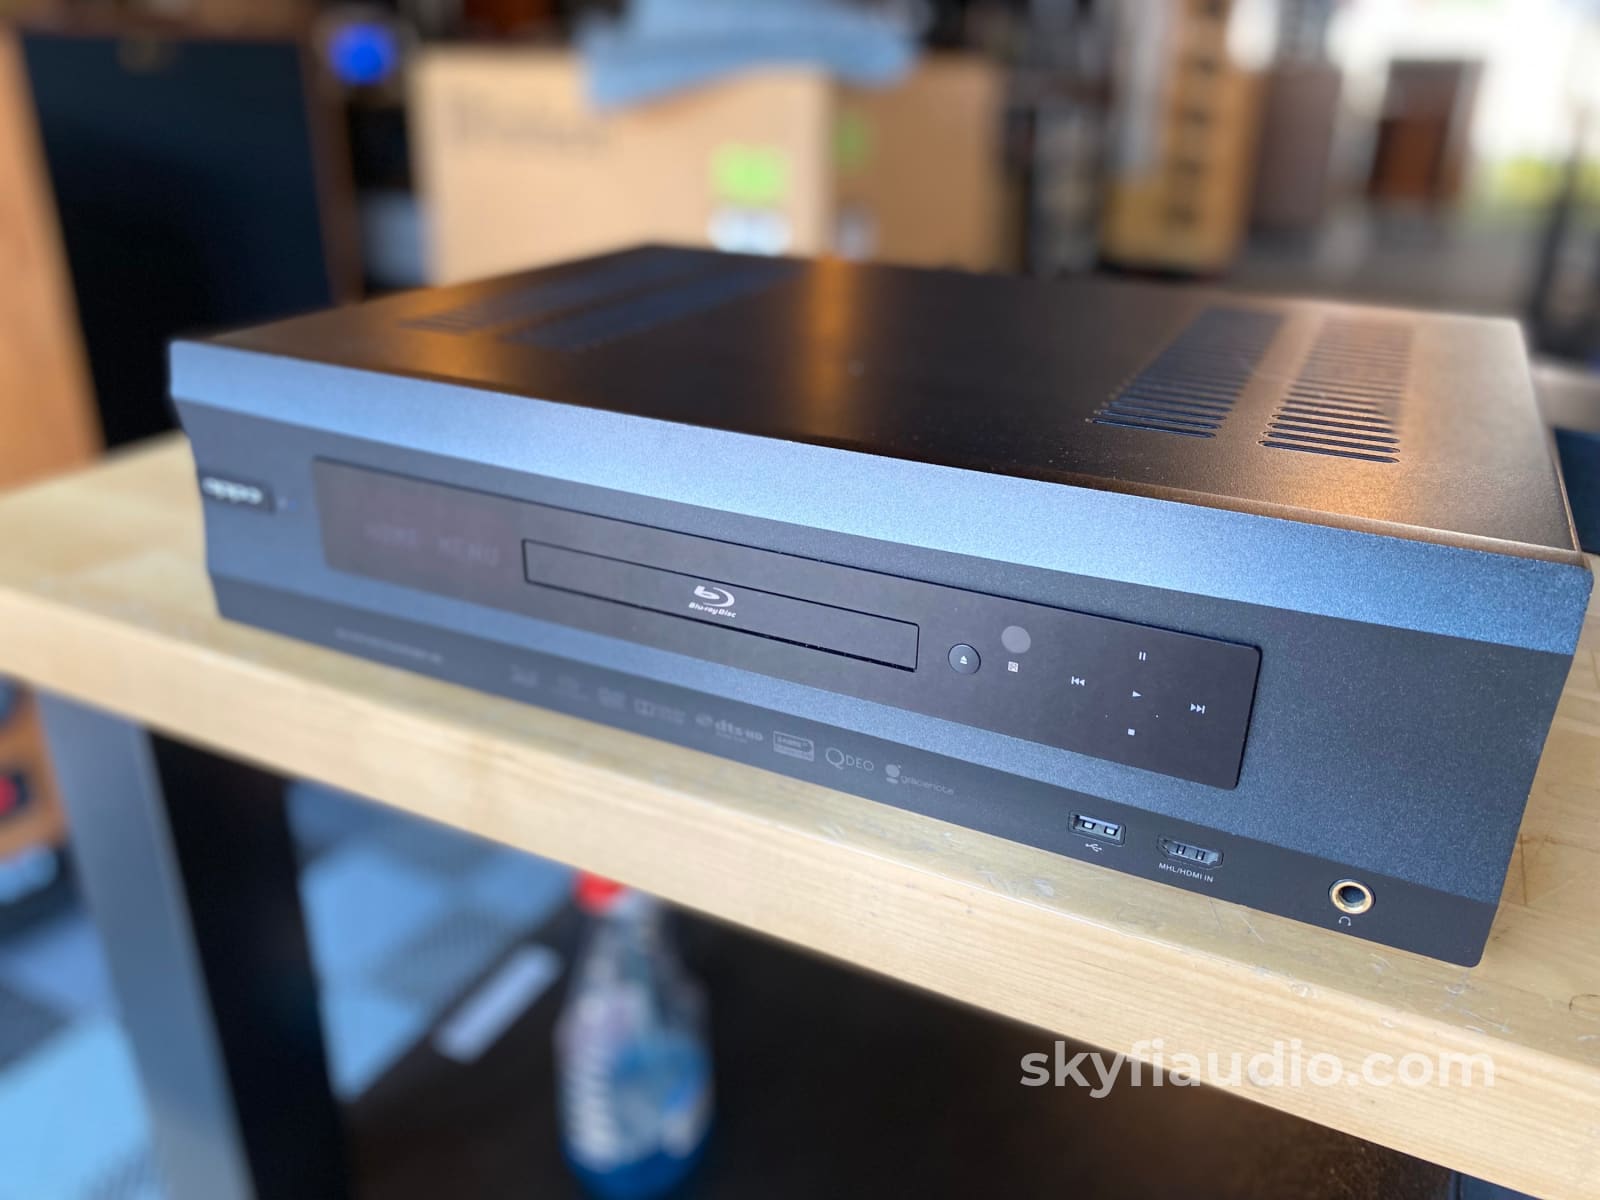 Oppo Bdp-105 Universal Disc Player - Modified By Electronic Visionary Systems Rec3Rhuzbpl9Z6A97